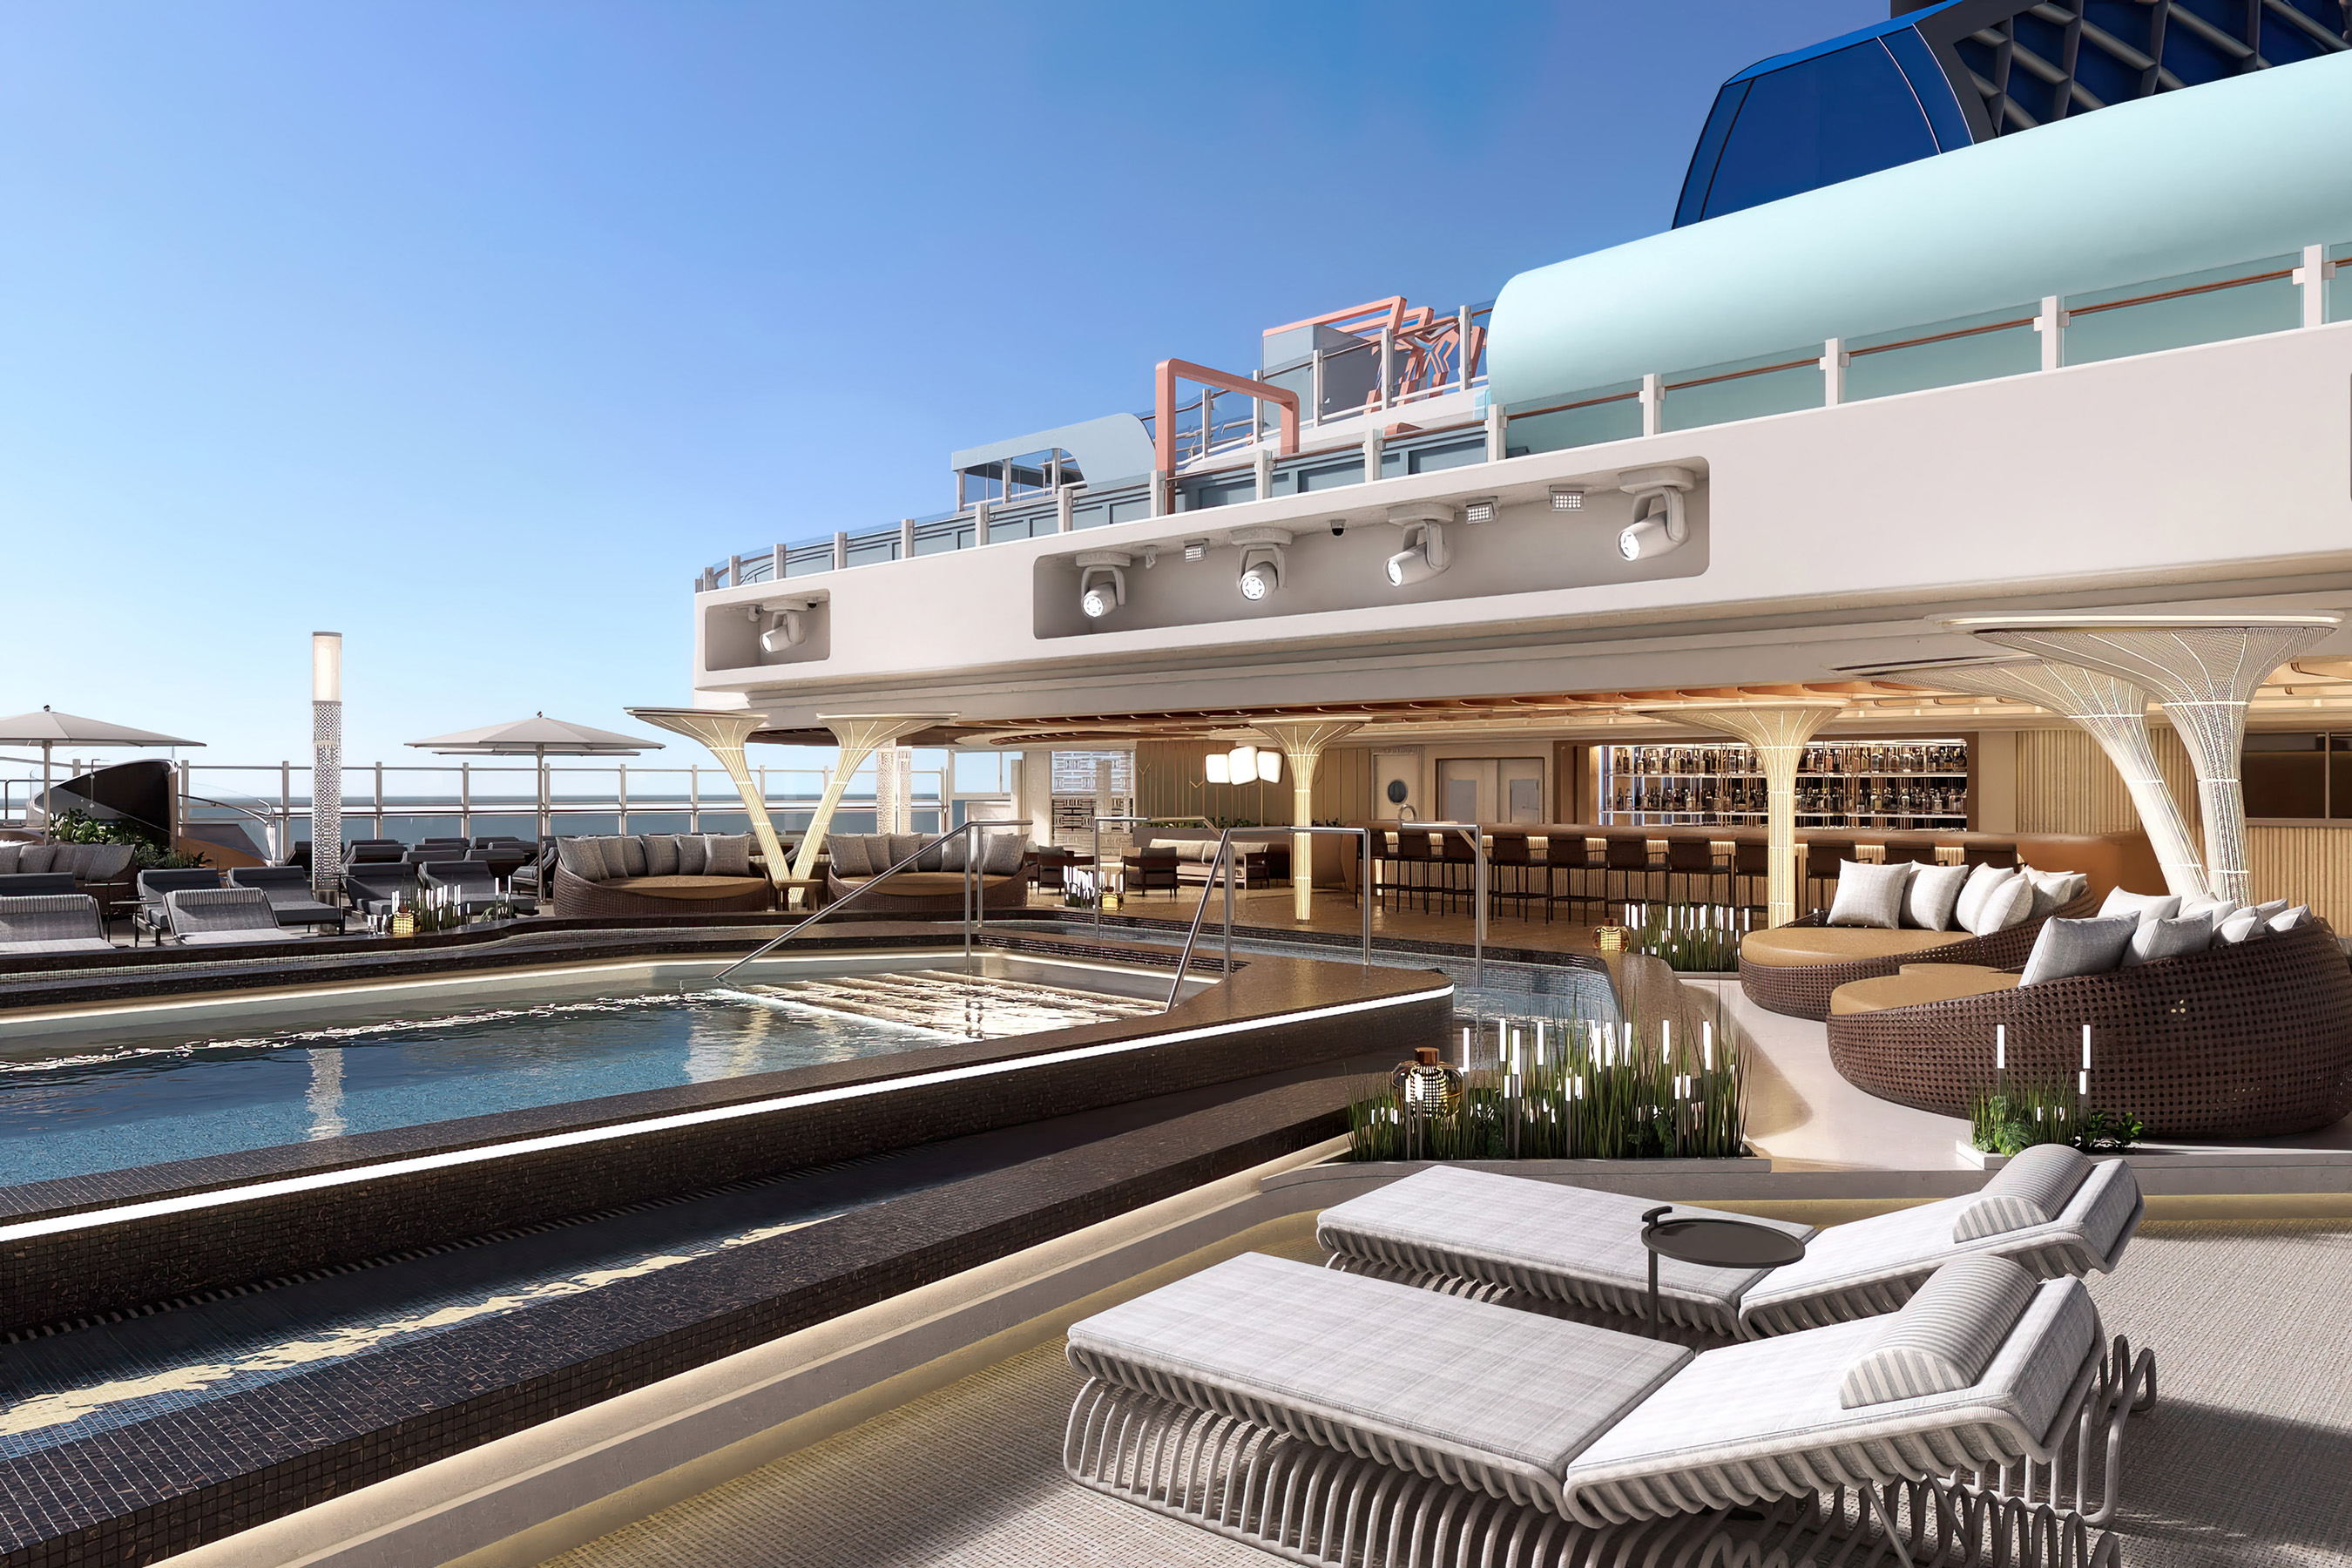 For the first time, Norwegian Cruise Line will feature day beds around the main pool deck to offer guests an expanded variety of seating for ultimate relaxation on board Norwegian Aqua.